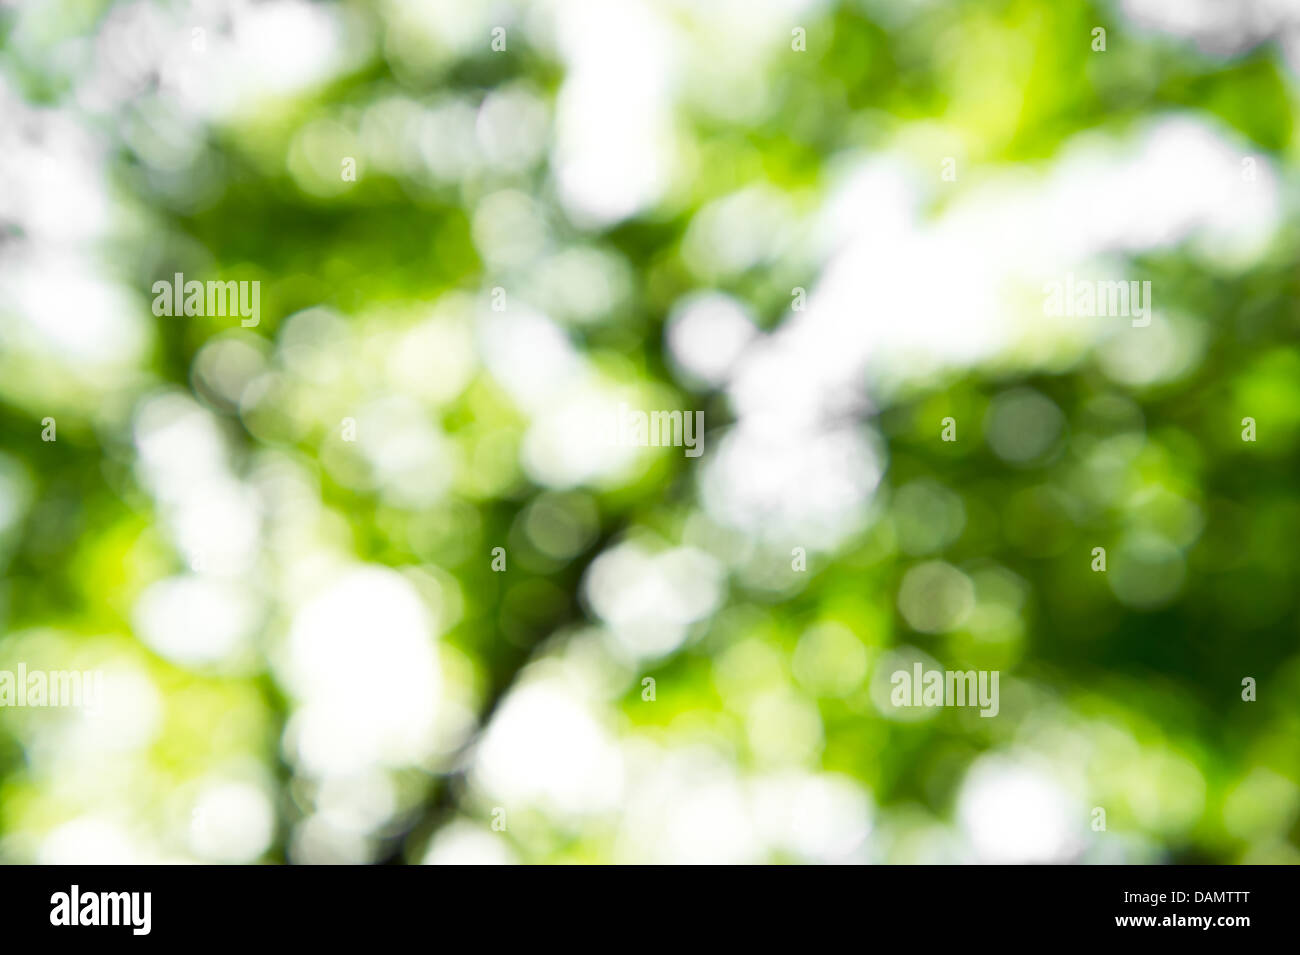 Natural outdoors bokeh in green and yellow tone Stock Photo